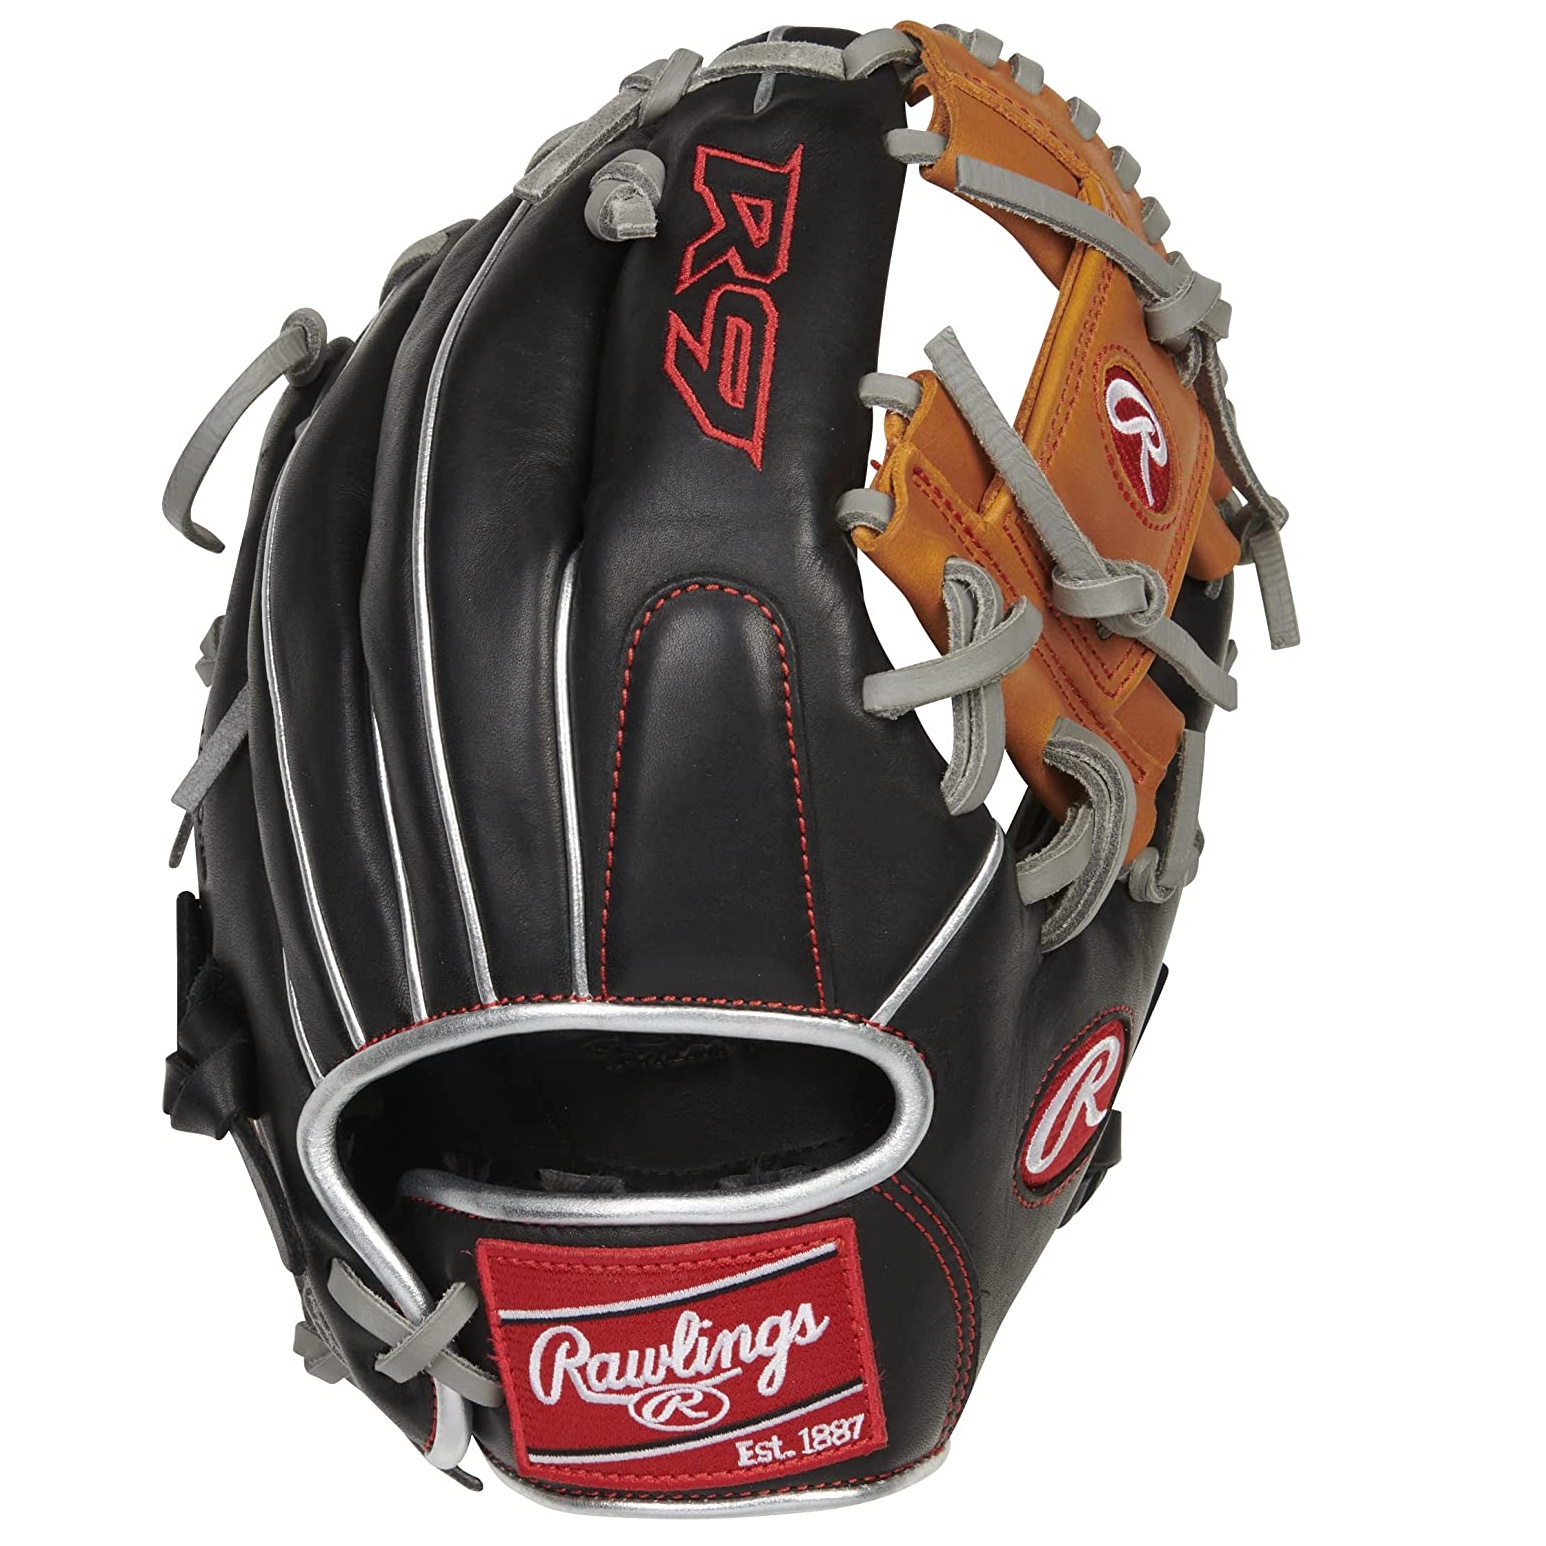 rawlings-r9-contour-baseball-glove-11-25-inch-pro-i-web-right-hand-throw R91125U-2BT-RightHandThrow Rawlings  Contour Fit  Narrow Finger Stalls Lowered Finger Stalls Smaller Wrist